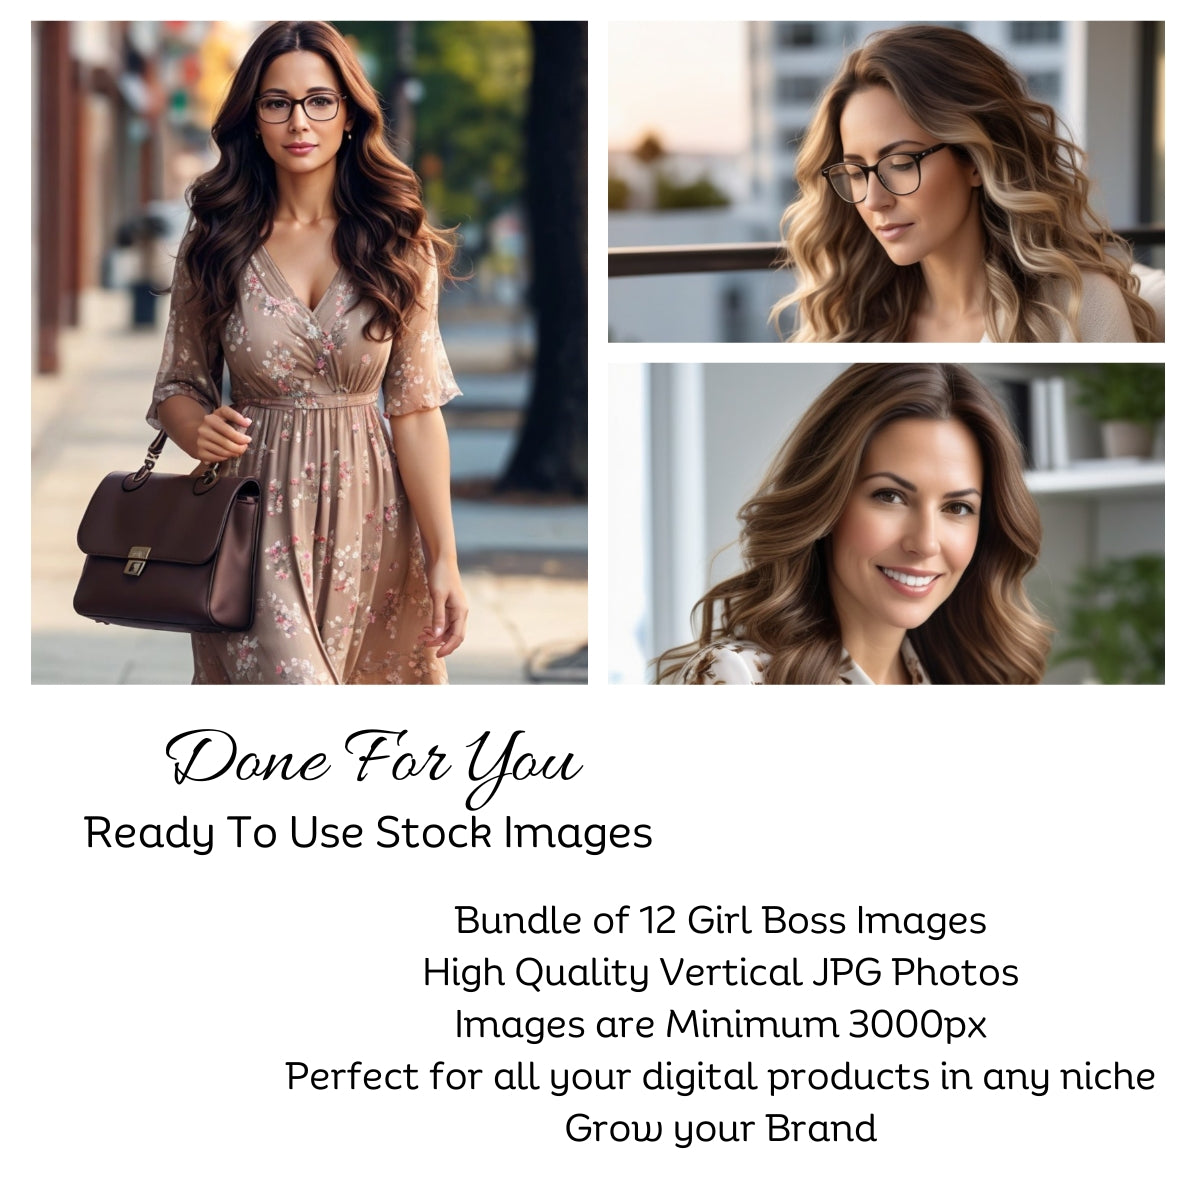 Girl Boss Stock Images, Business Women Photos with Commerical Use Rights